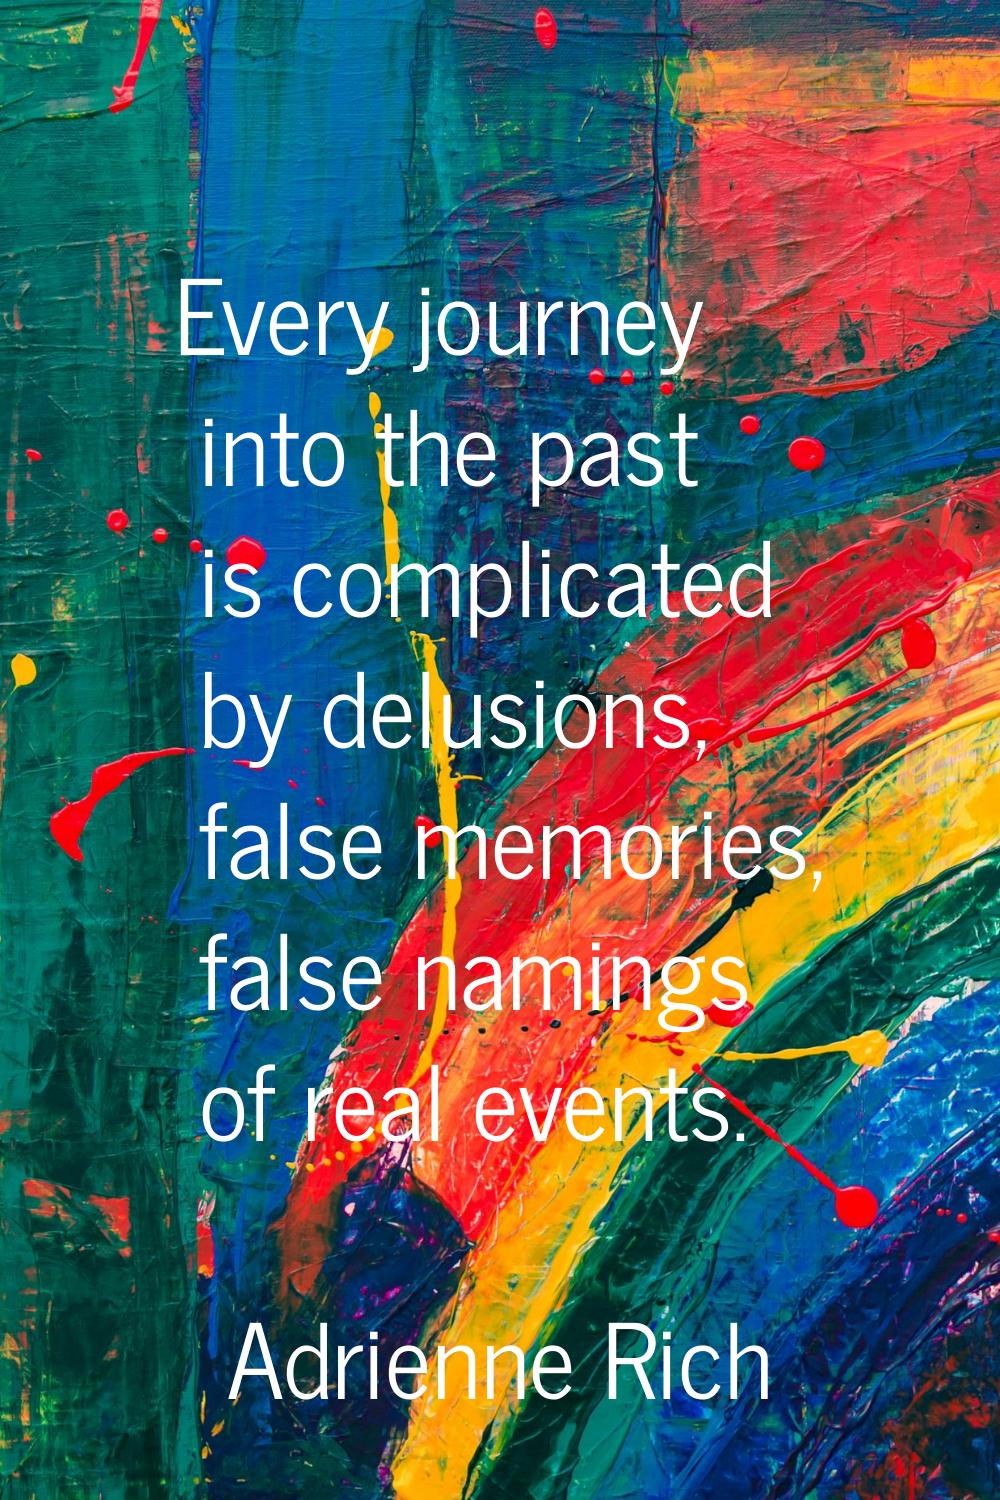 Every journey into the past is complicated by delusions, false memories, false namings of real even